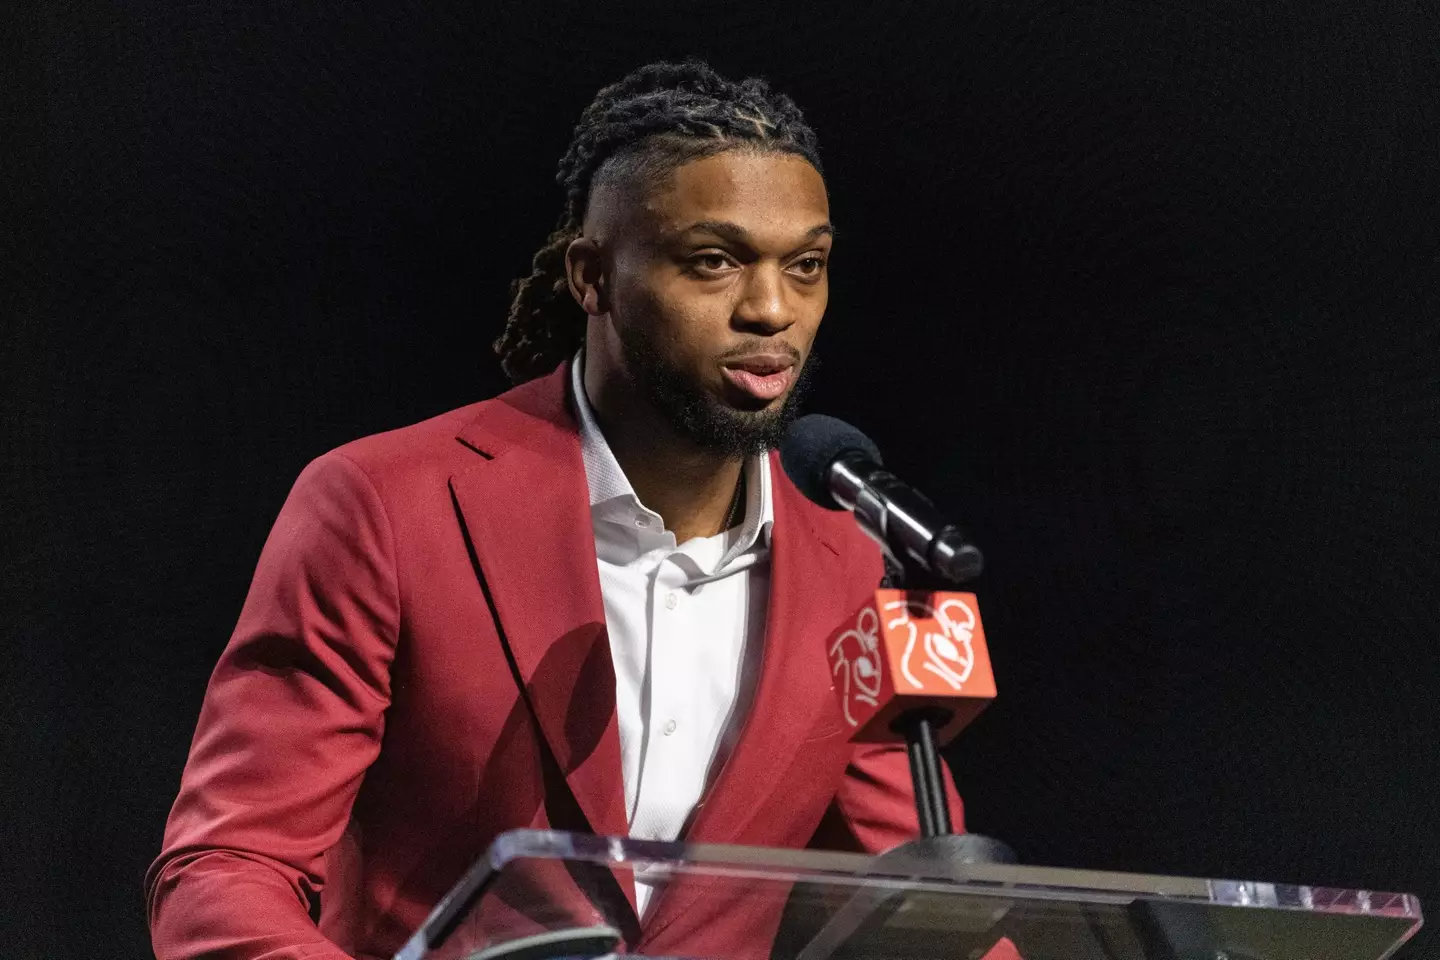 Damar Hamlin has responded to backlash he faced for his jacket choice at the 2023 Super Bowl.